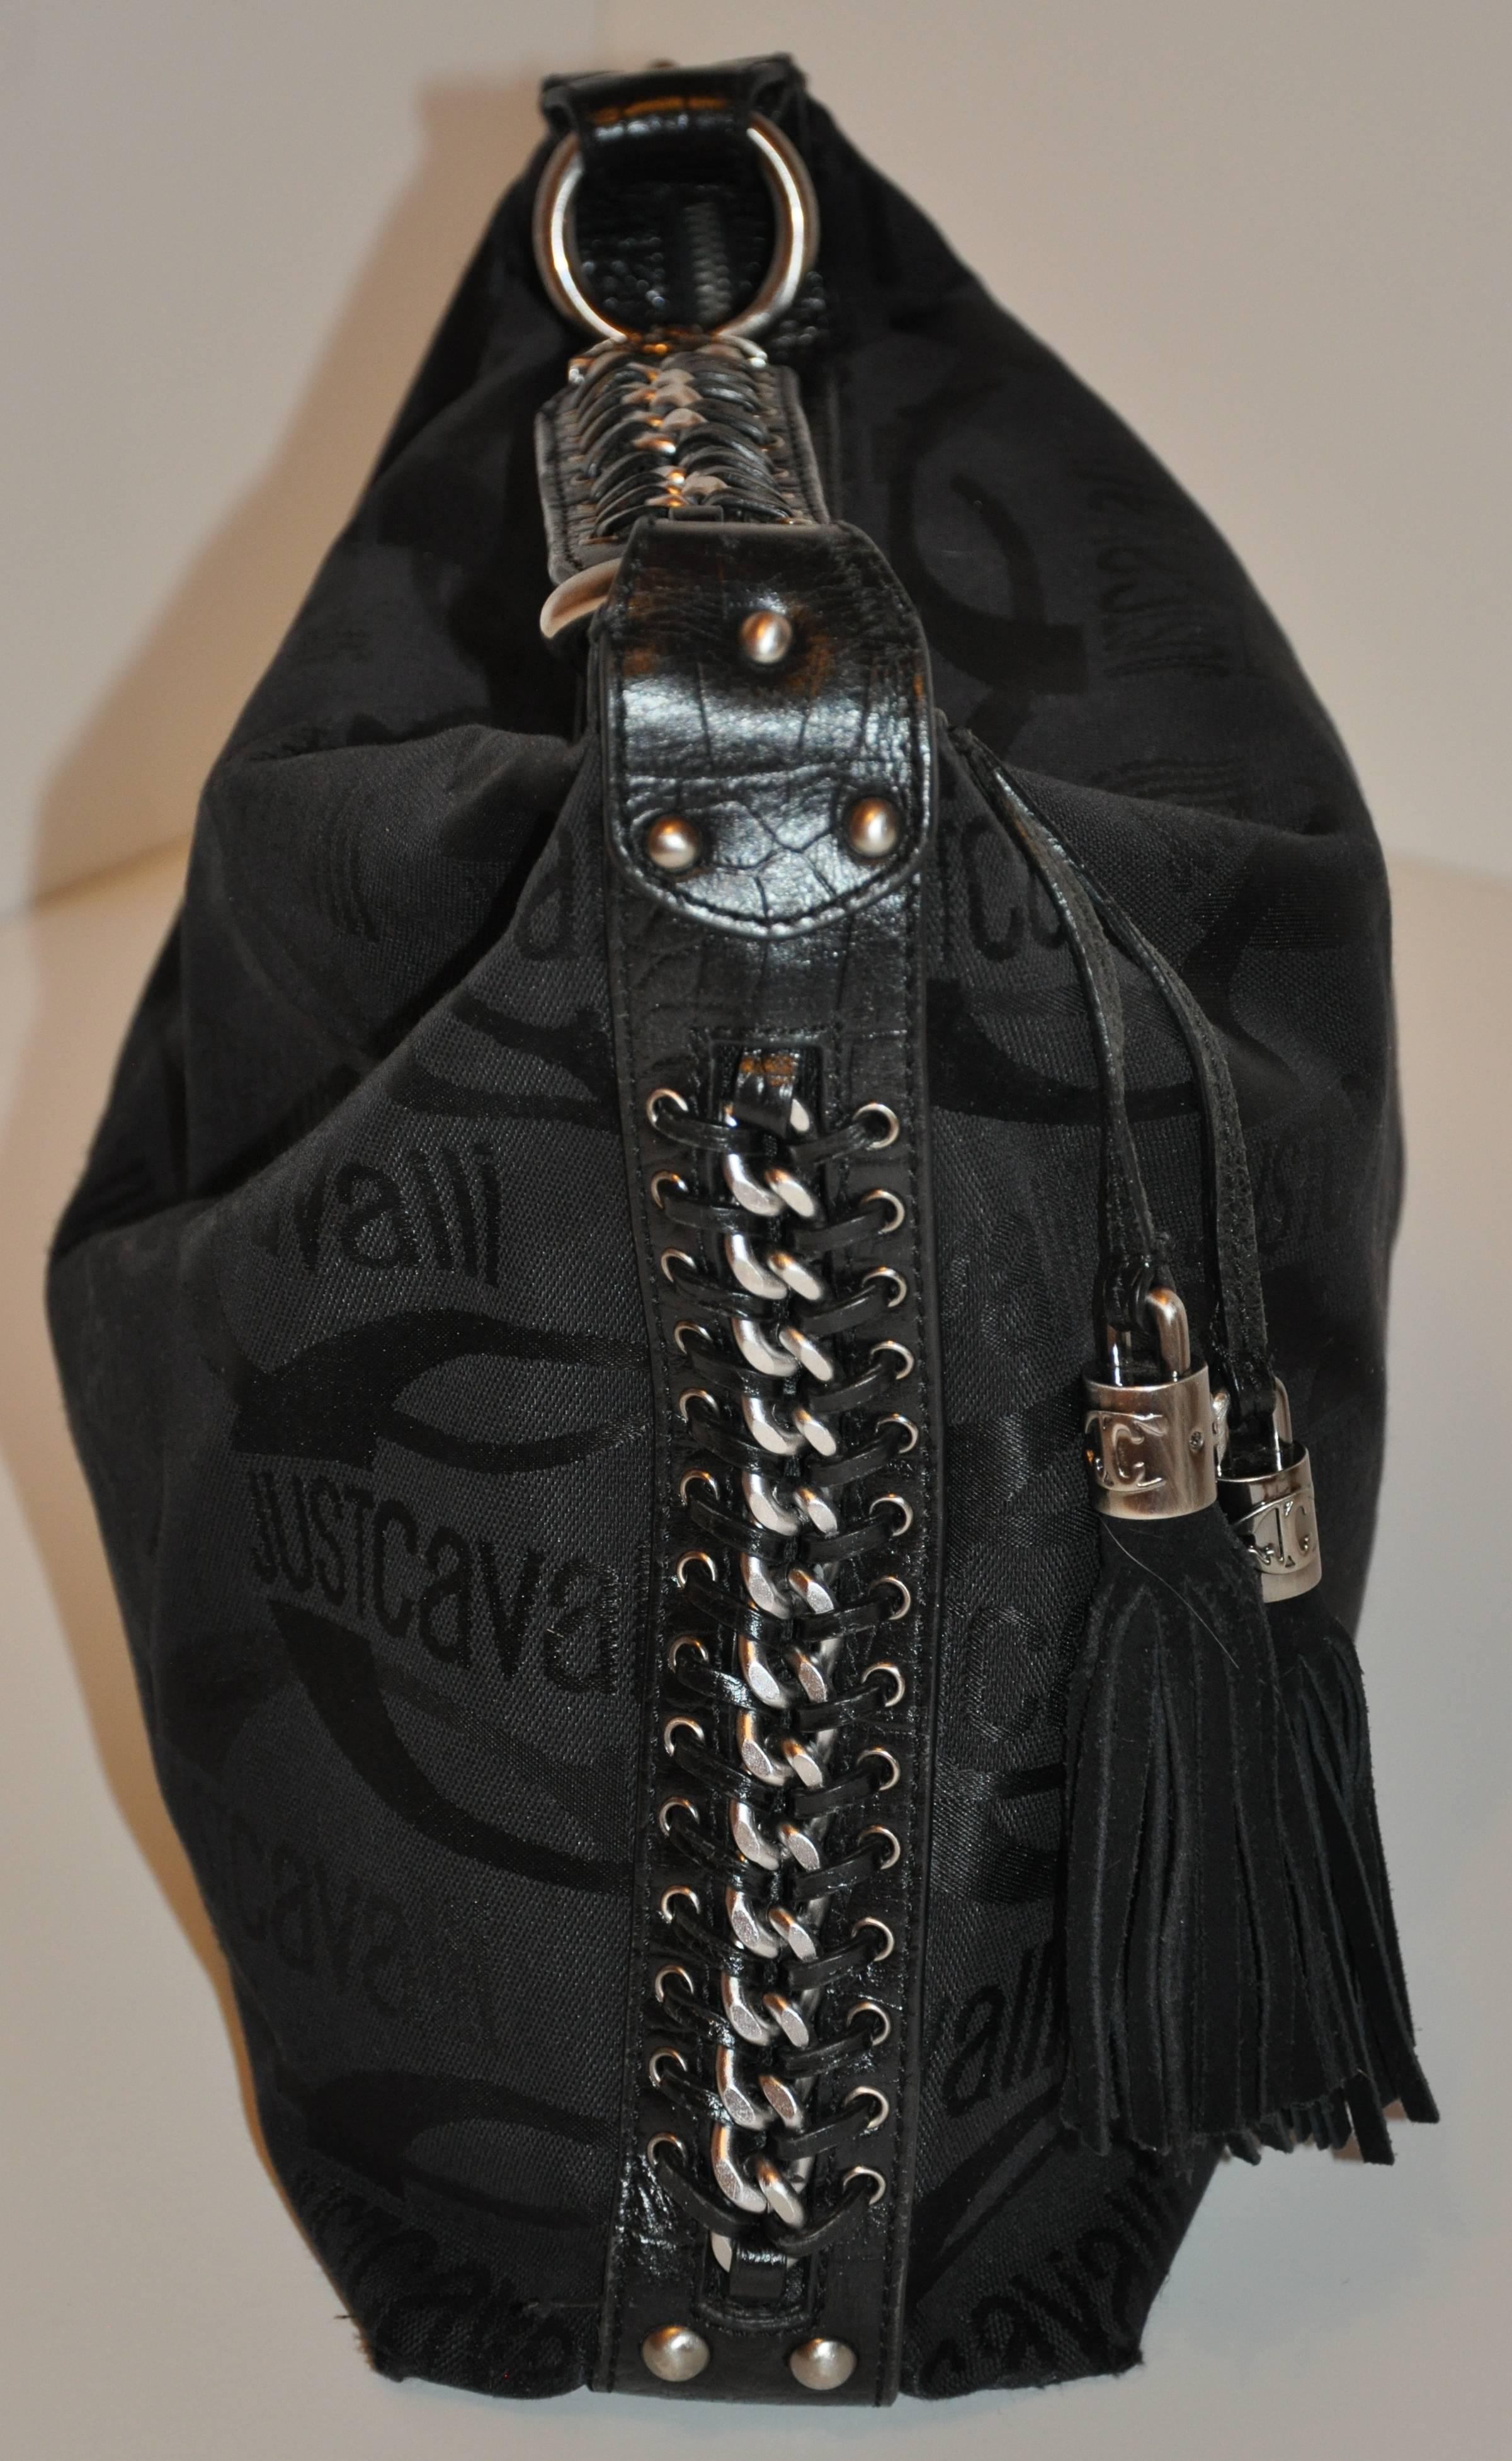        Roberto Cavalli black signature logo handbag is detailed with hand-woven sides combined with matted steel gray hardware and calfskin. The zippered top measures 14 1/2 inches, accented with two suede poms-poms along with his signature logo on